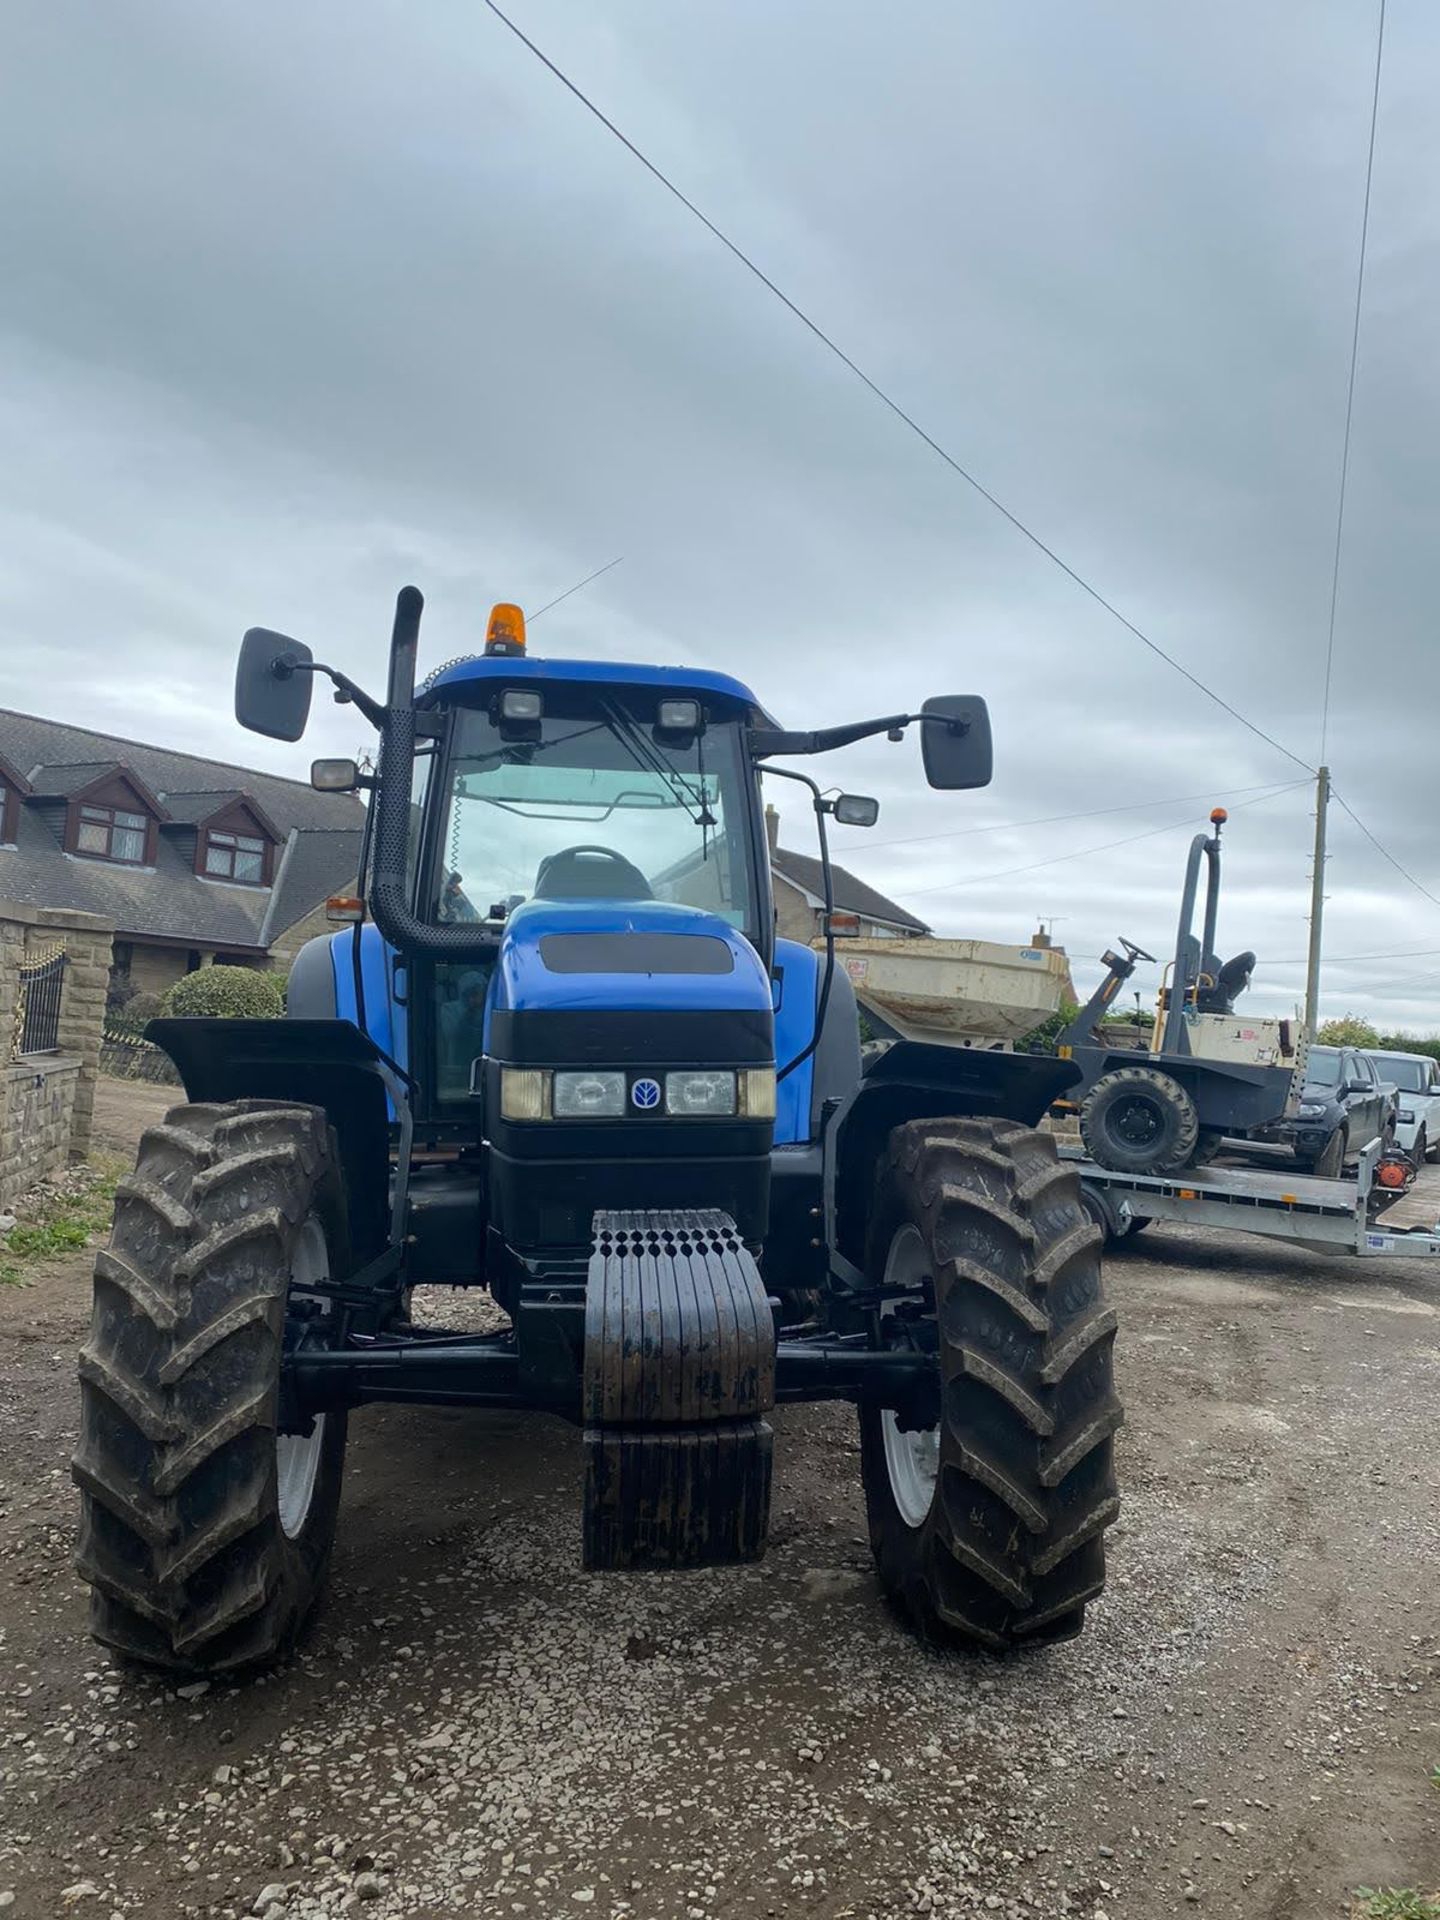 NEW HOLLAND TM120 TRACTOR, 4 WHEEL DRIVE, LOW HOURS ONLY 6128 GENUINE, MANUAL GEARBOX *PLUS VAT* - Image 3 of 10